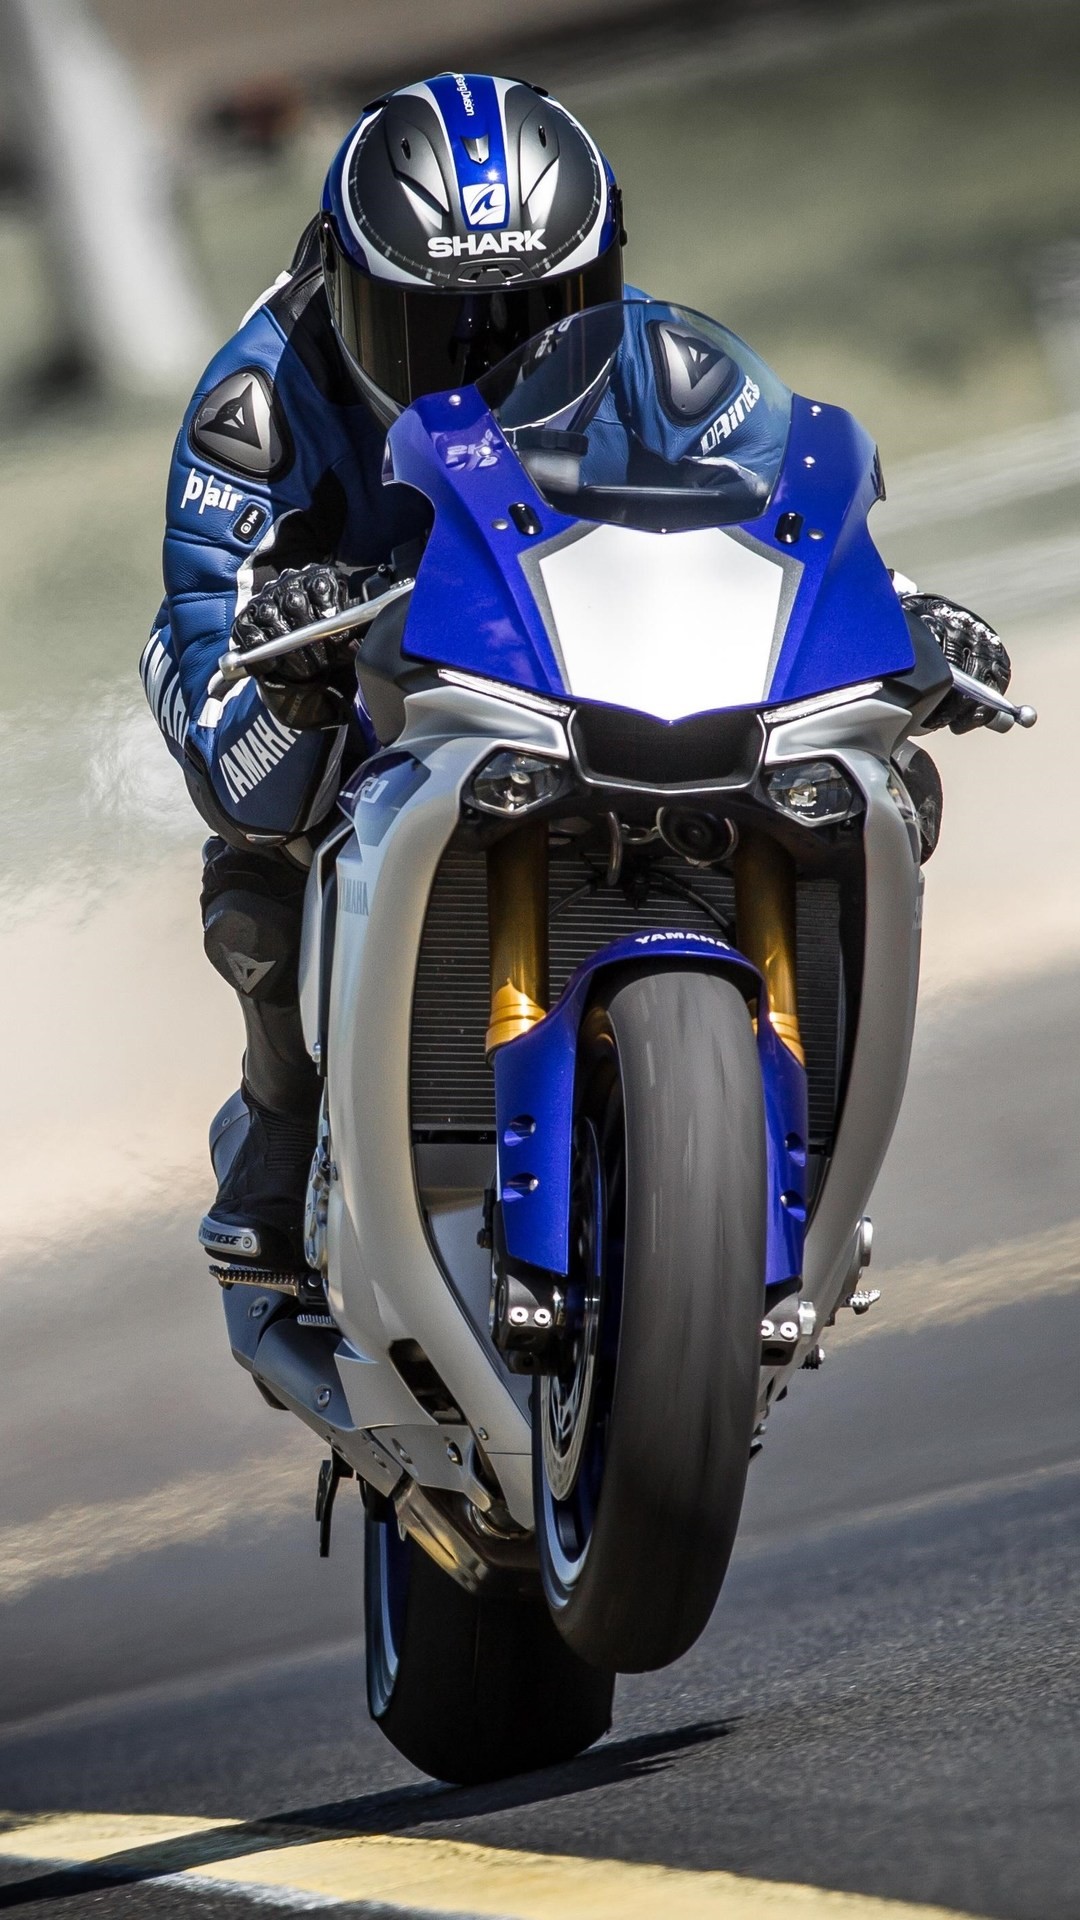 Yamaha R1 wallpaper by IronFistLive  Download on ZEDGE  6e73